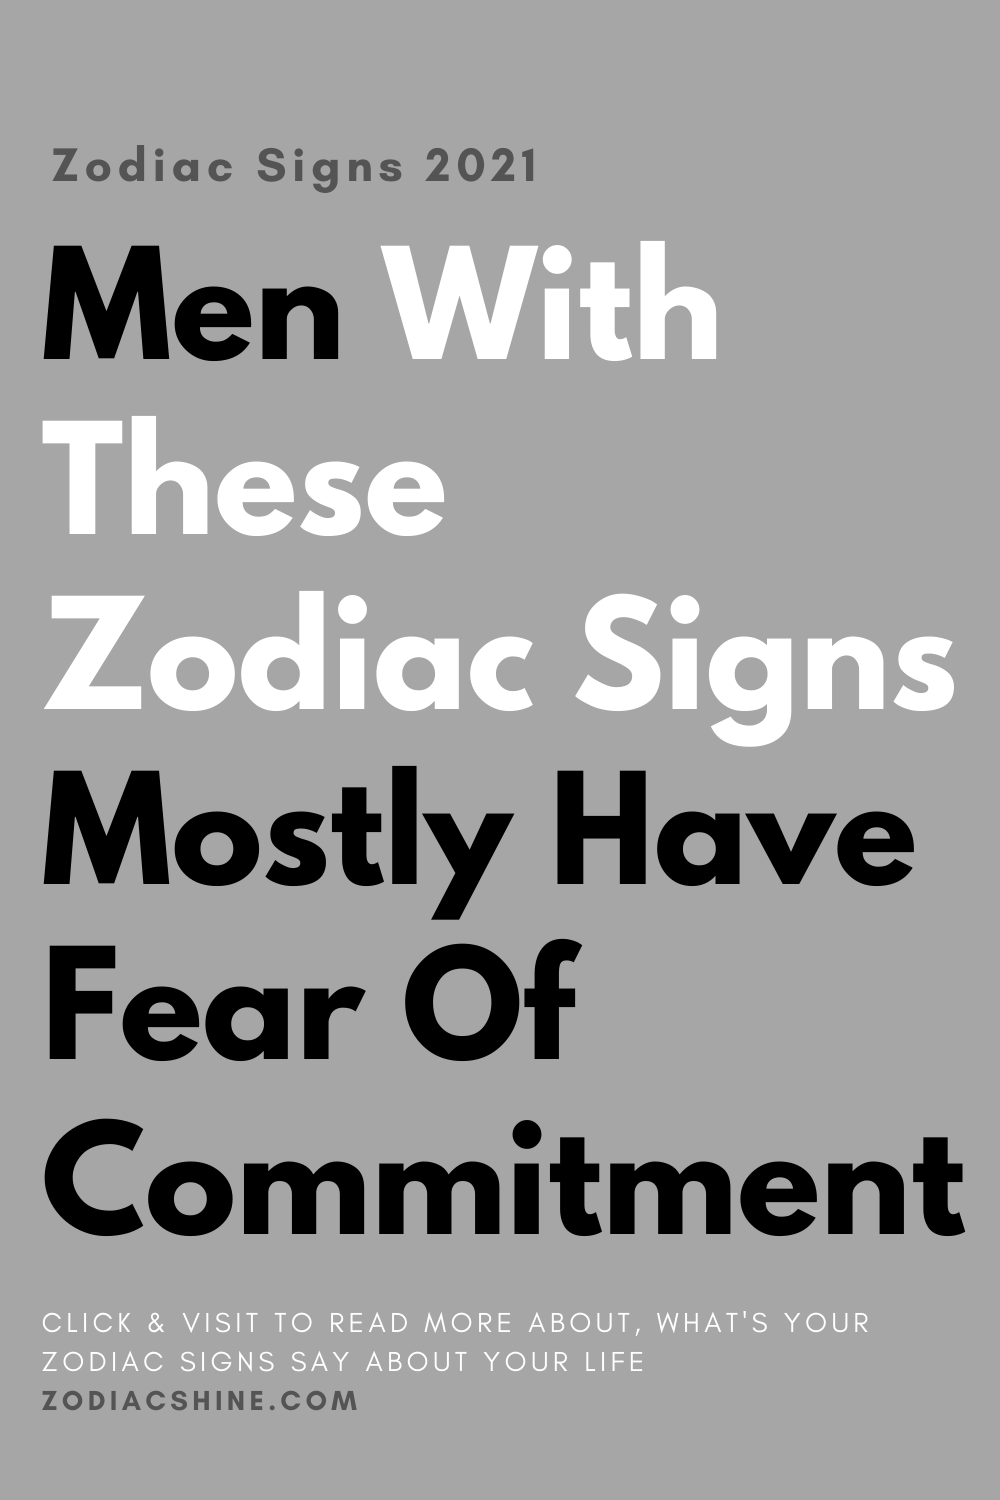 Men With These Zodiac Signs Mostly Have Fear Of Commitment